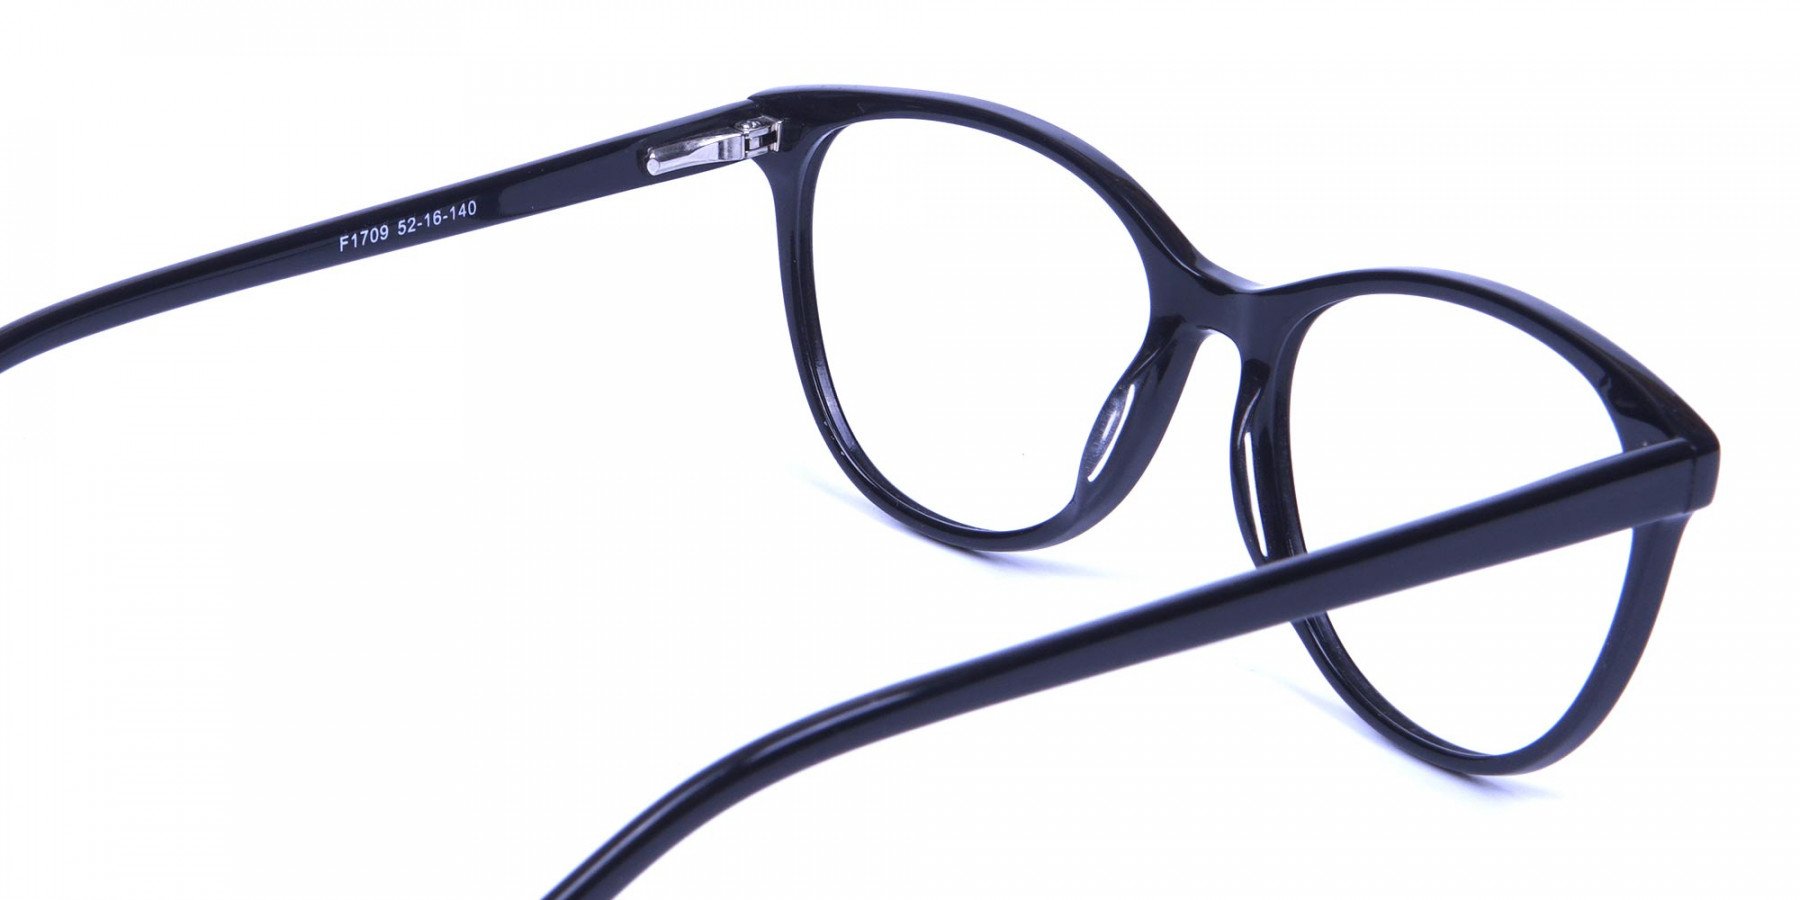 Smooth Curved Black Round Cat Eye Glasses